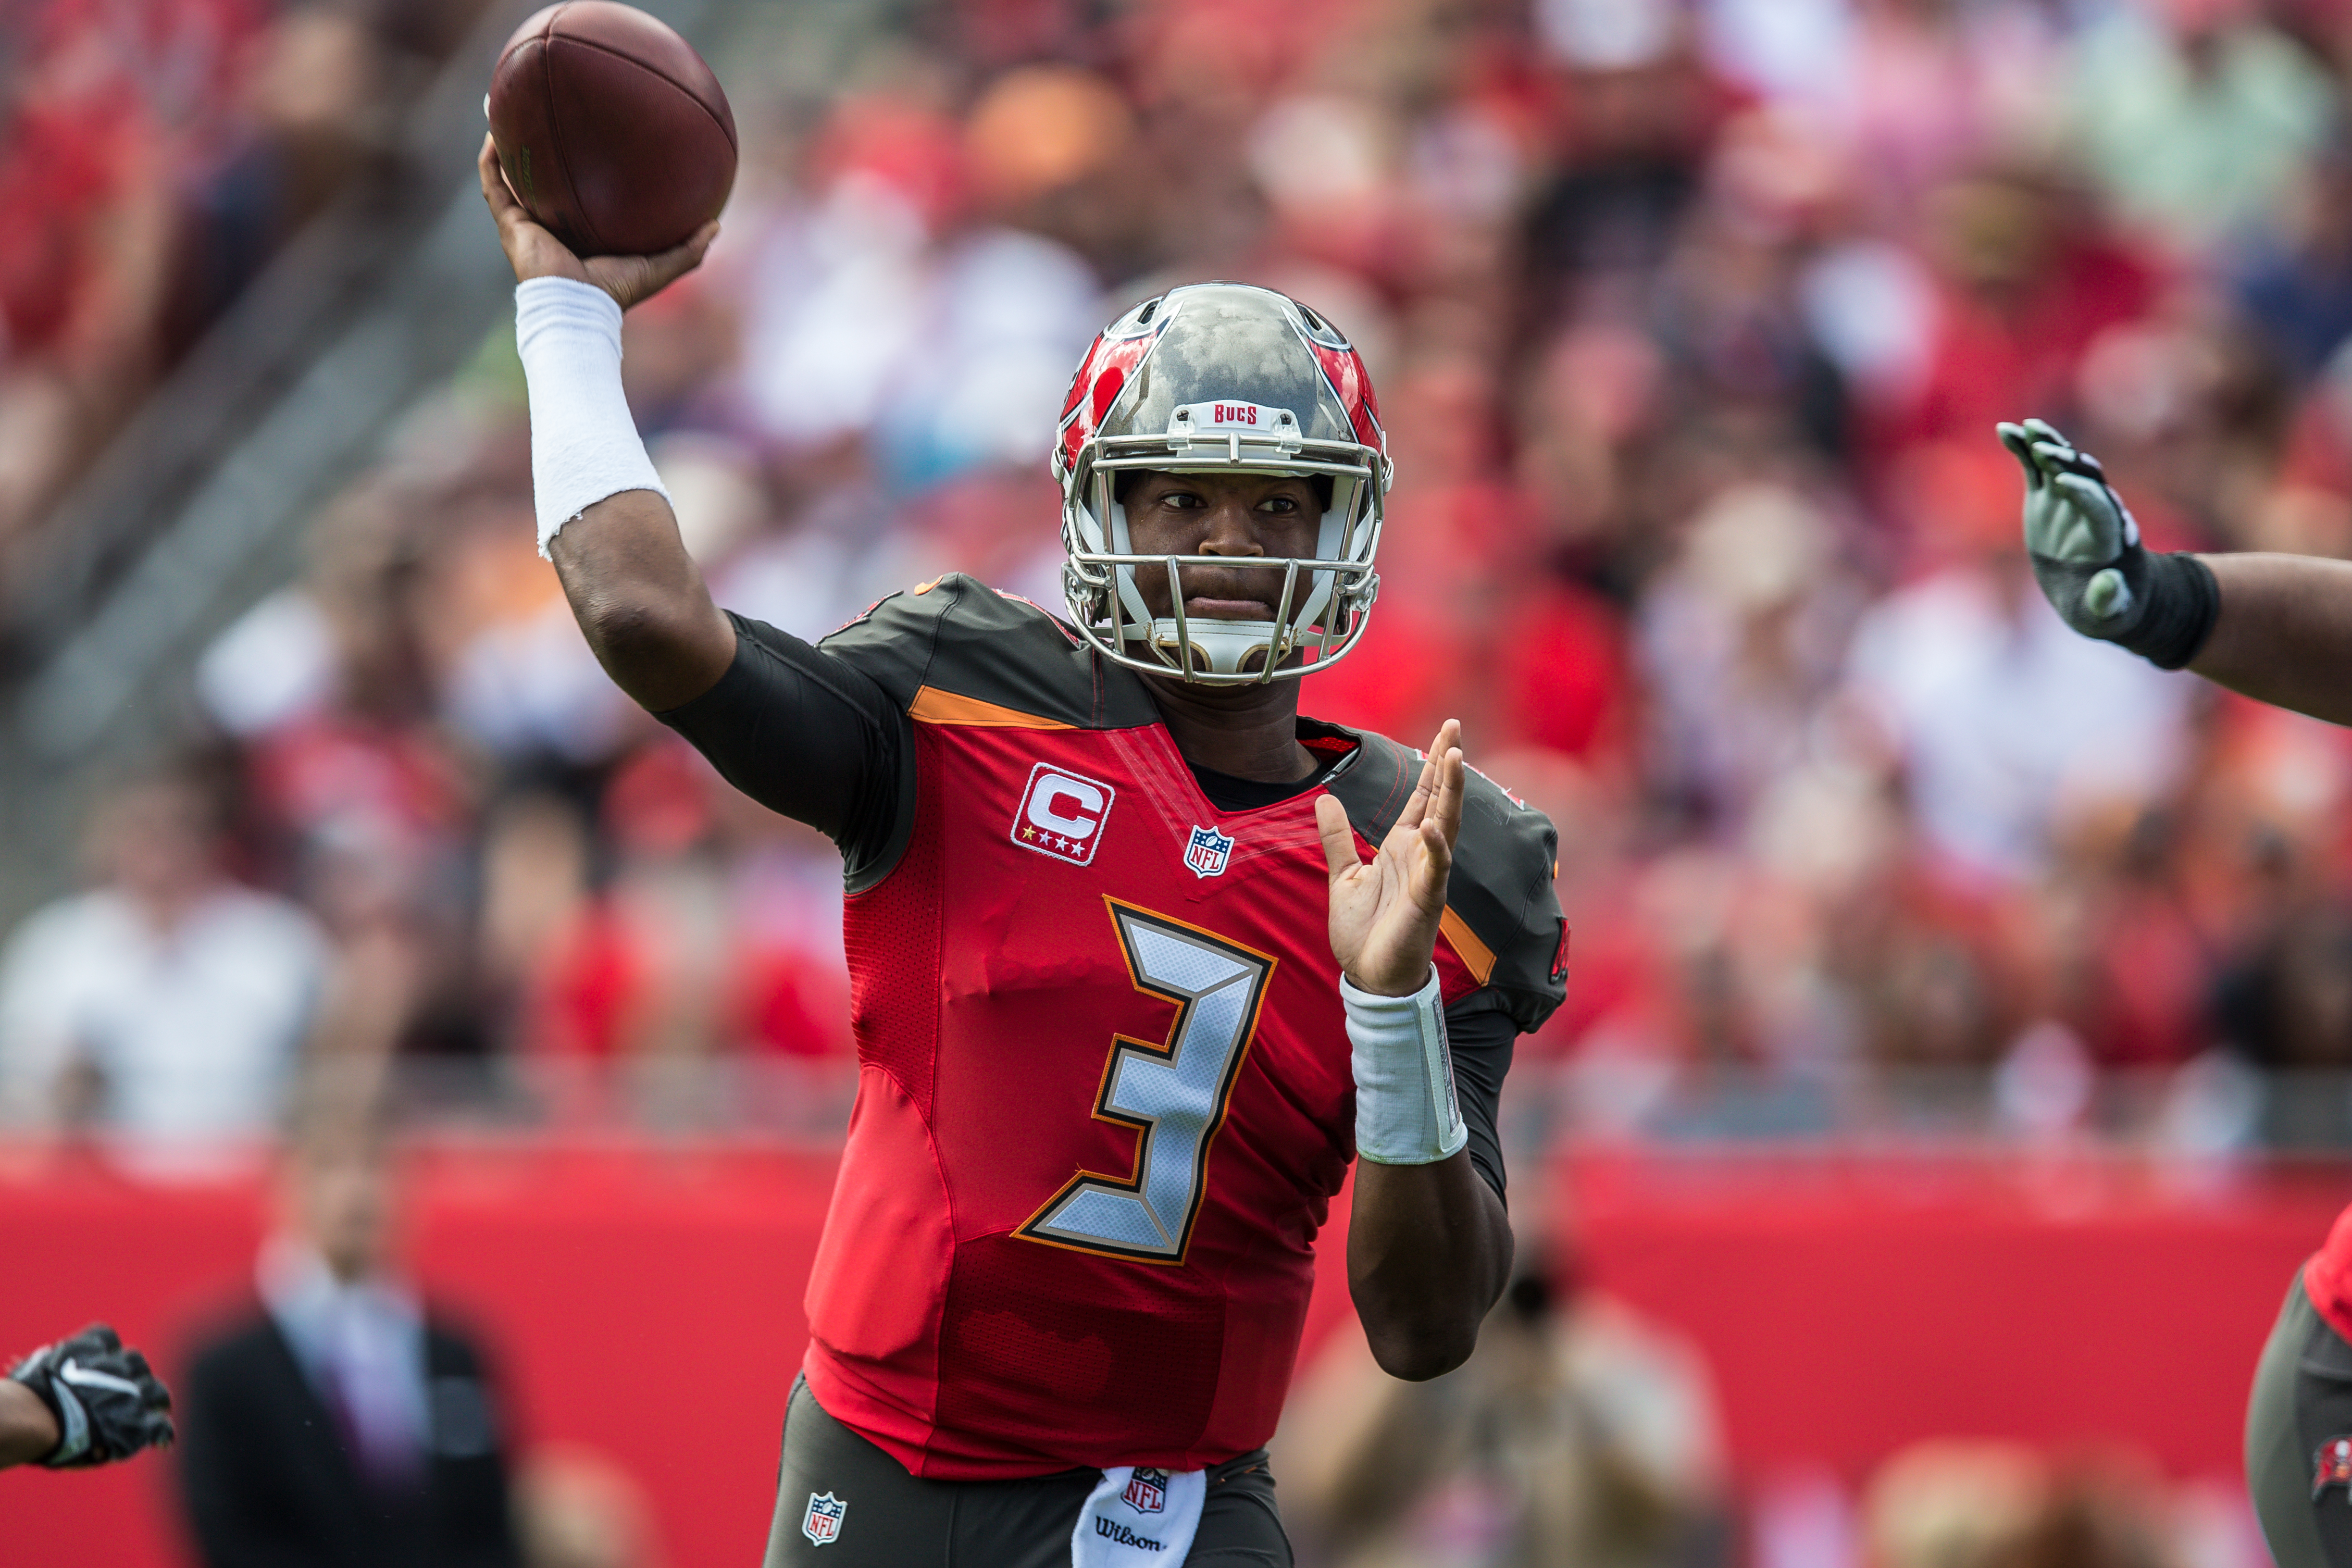 Winston needs to cut down on his turnovers./JEFFREY S. KING